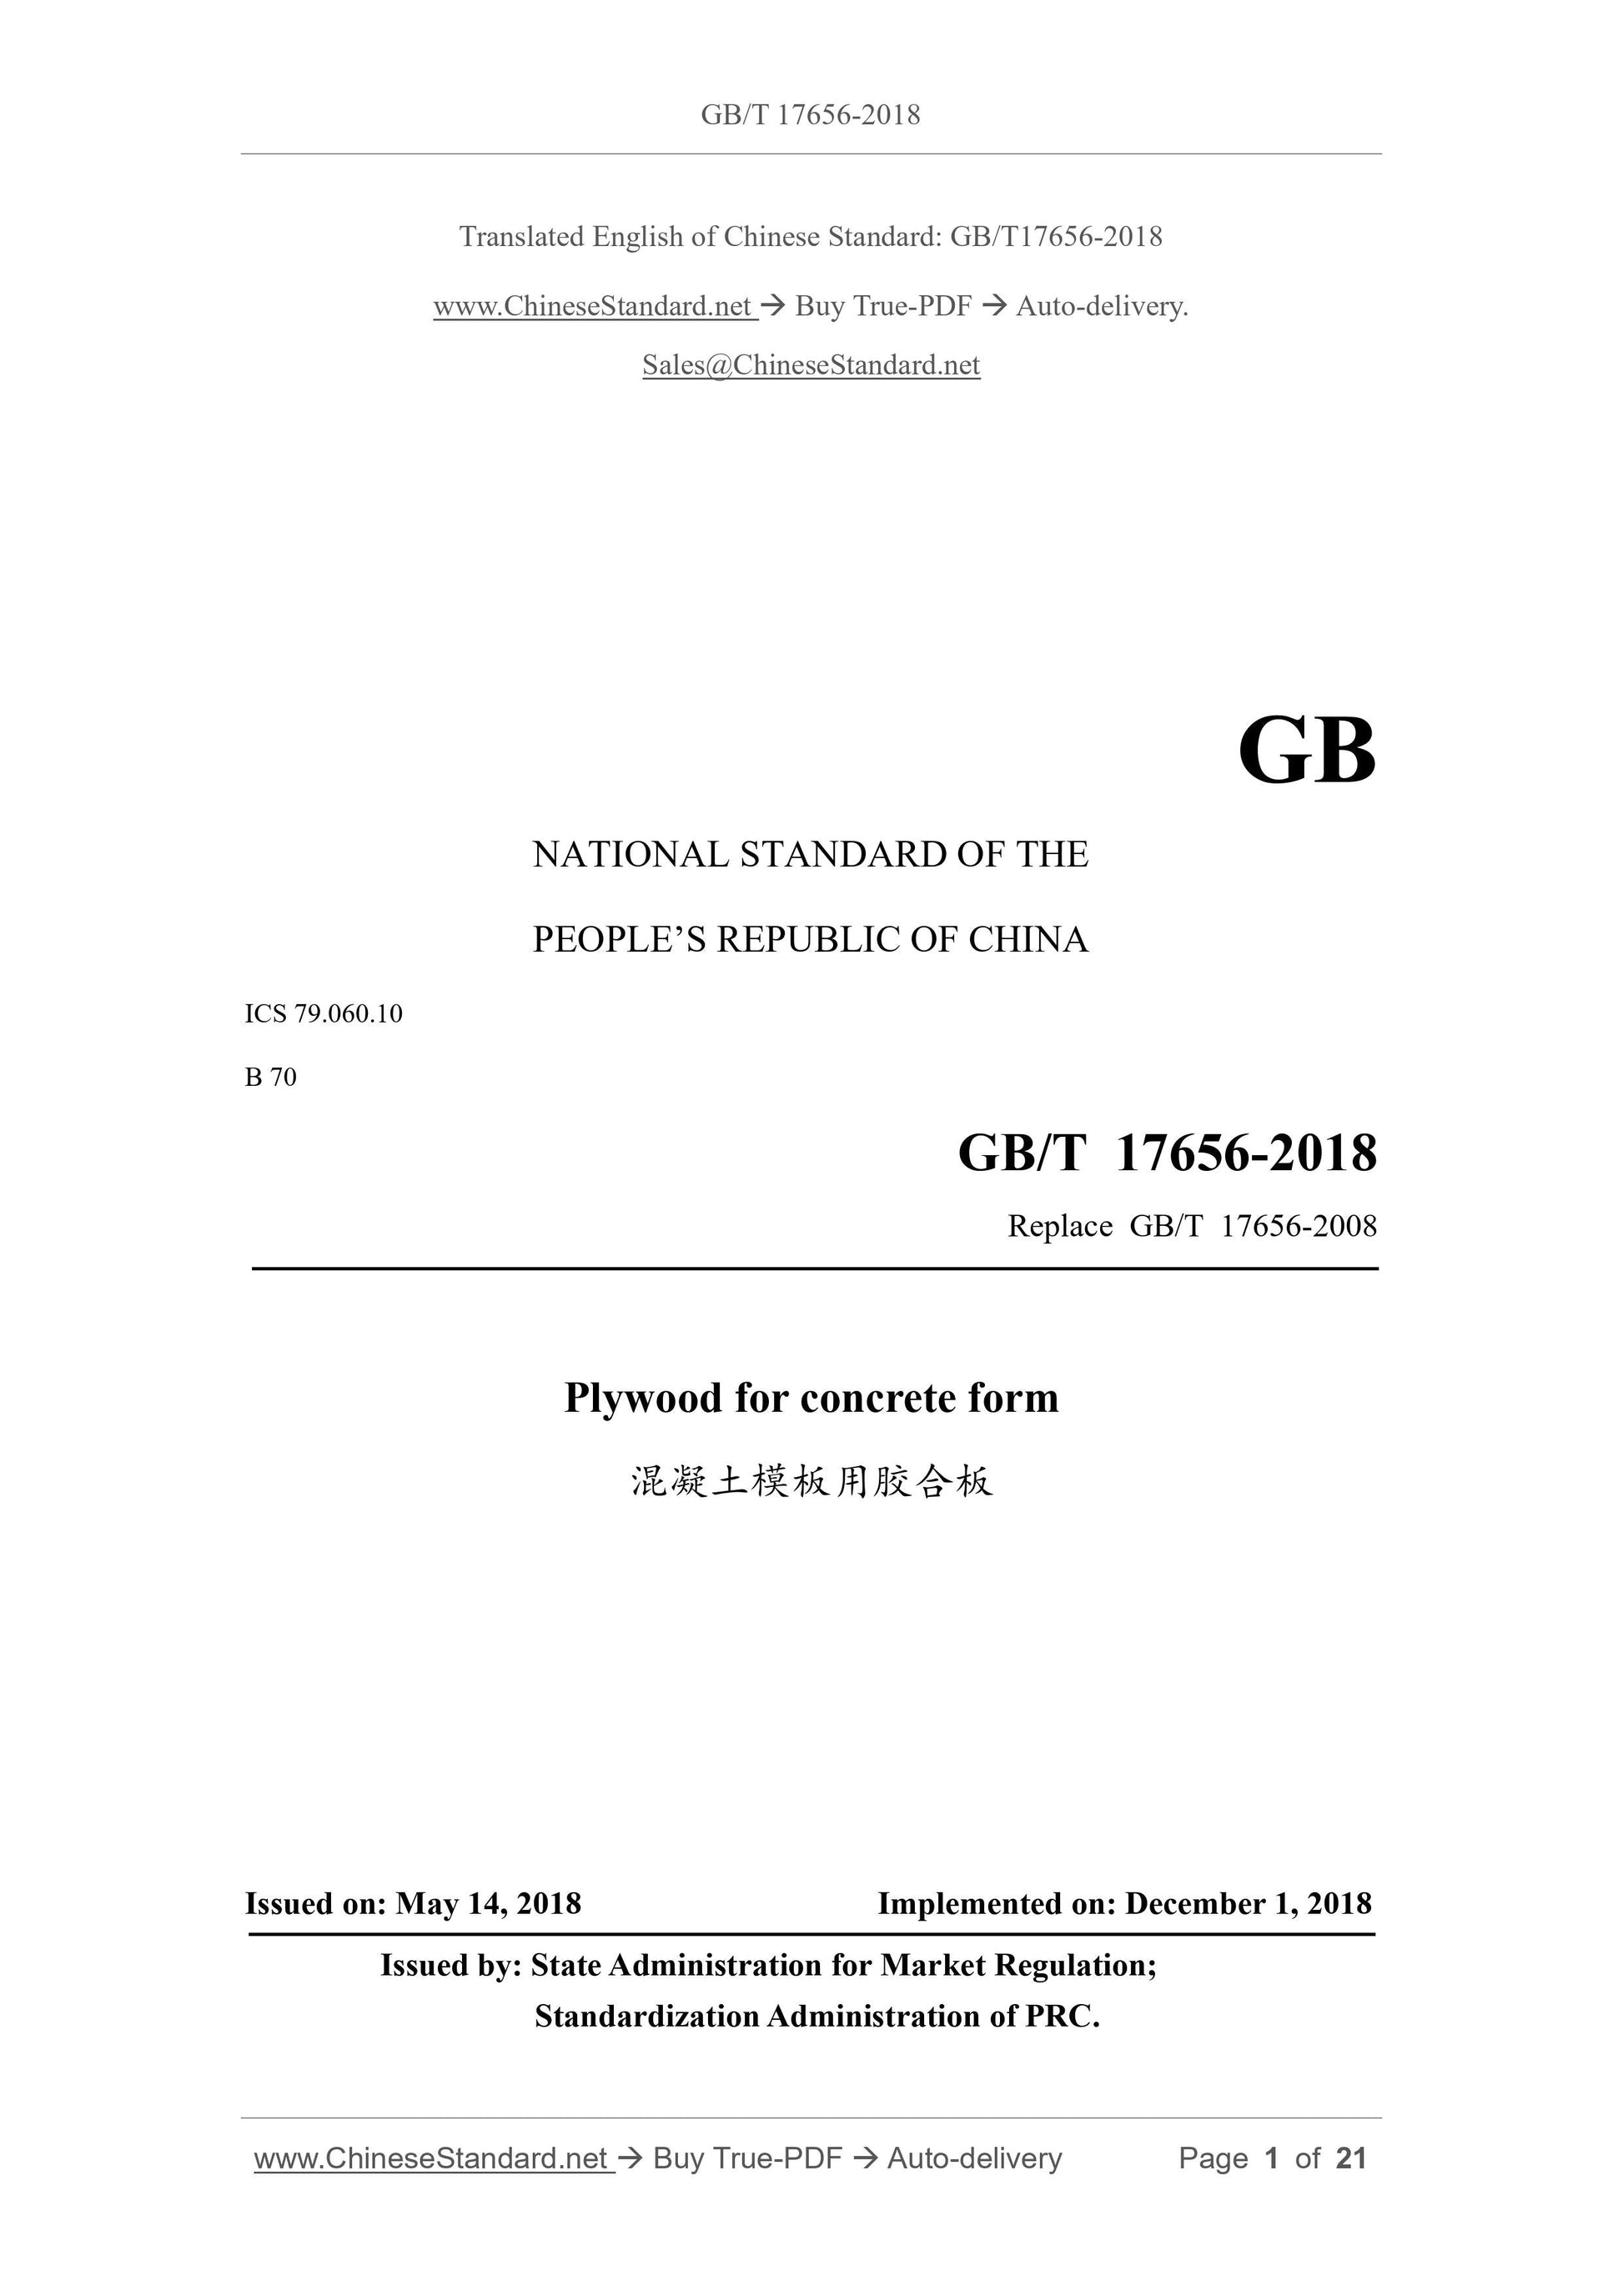 GB/T 17656-2018 Page 1